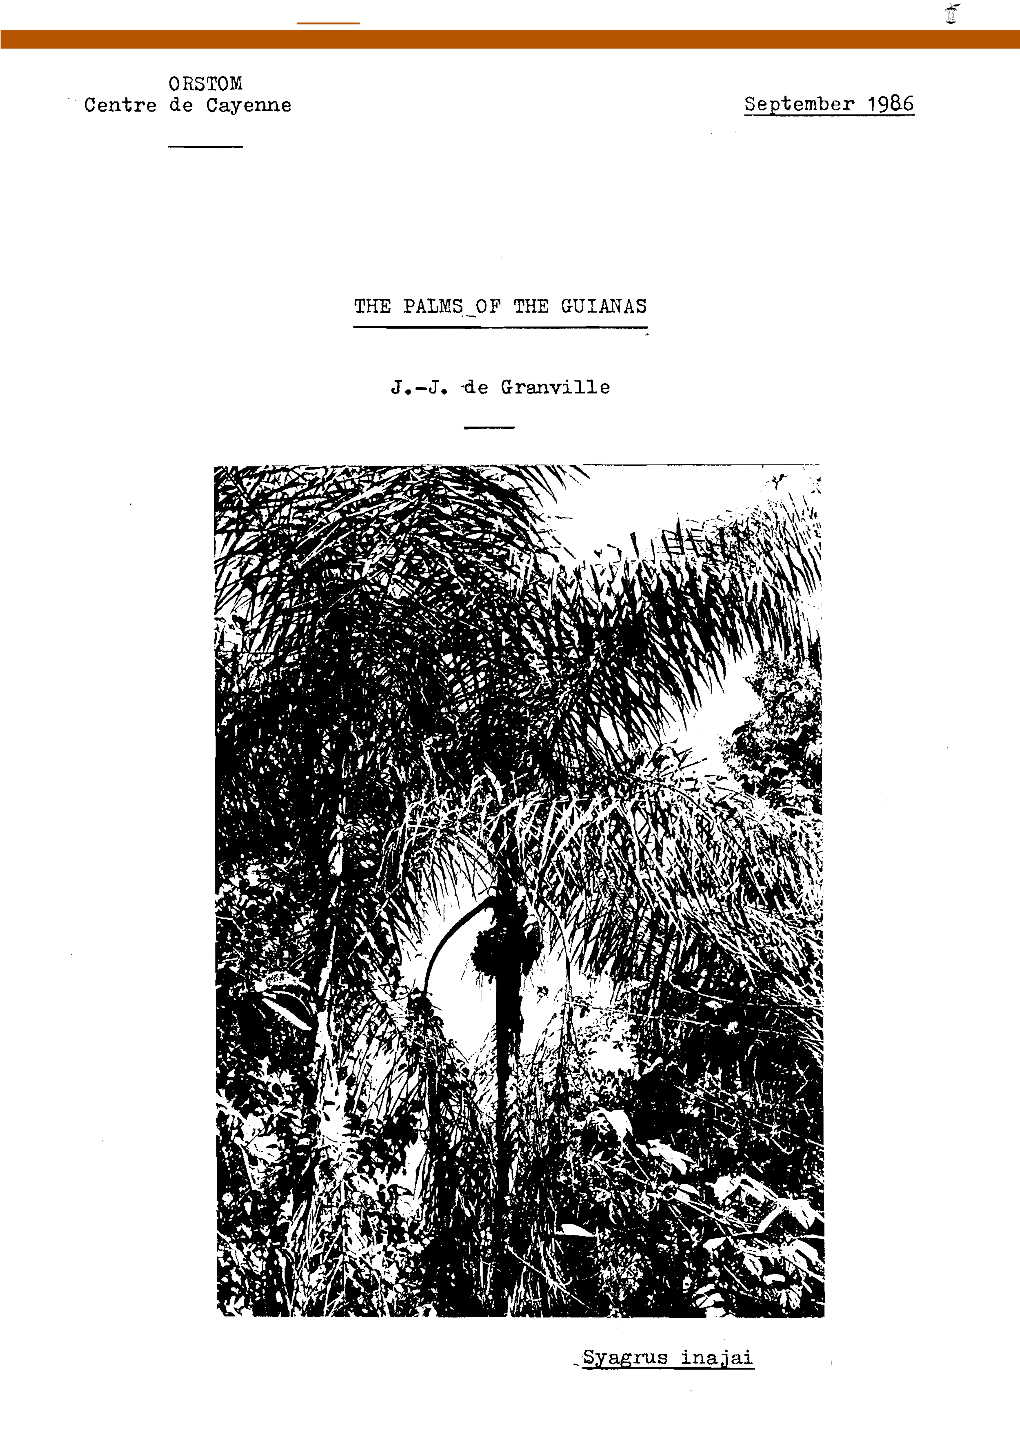 The Palms of the Guianas